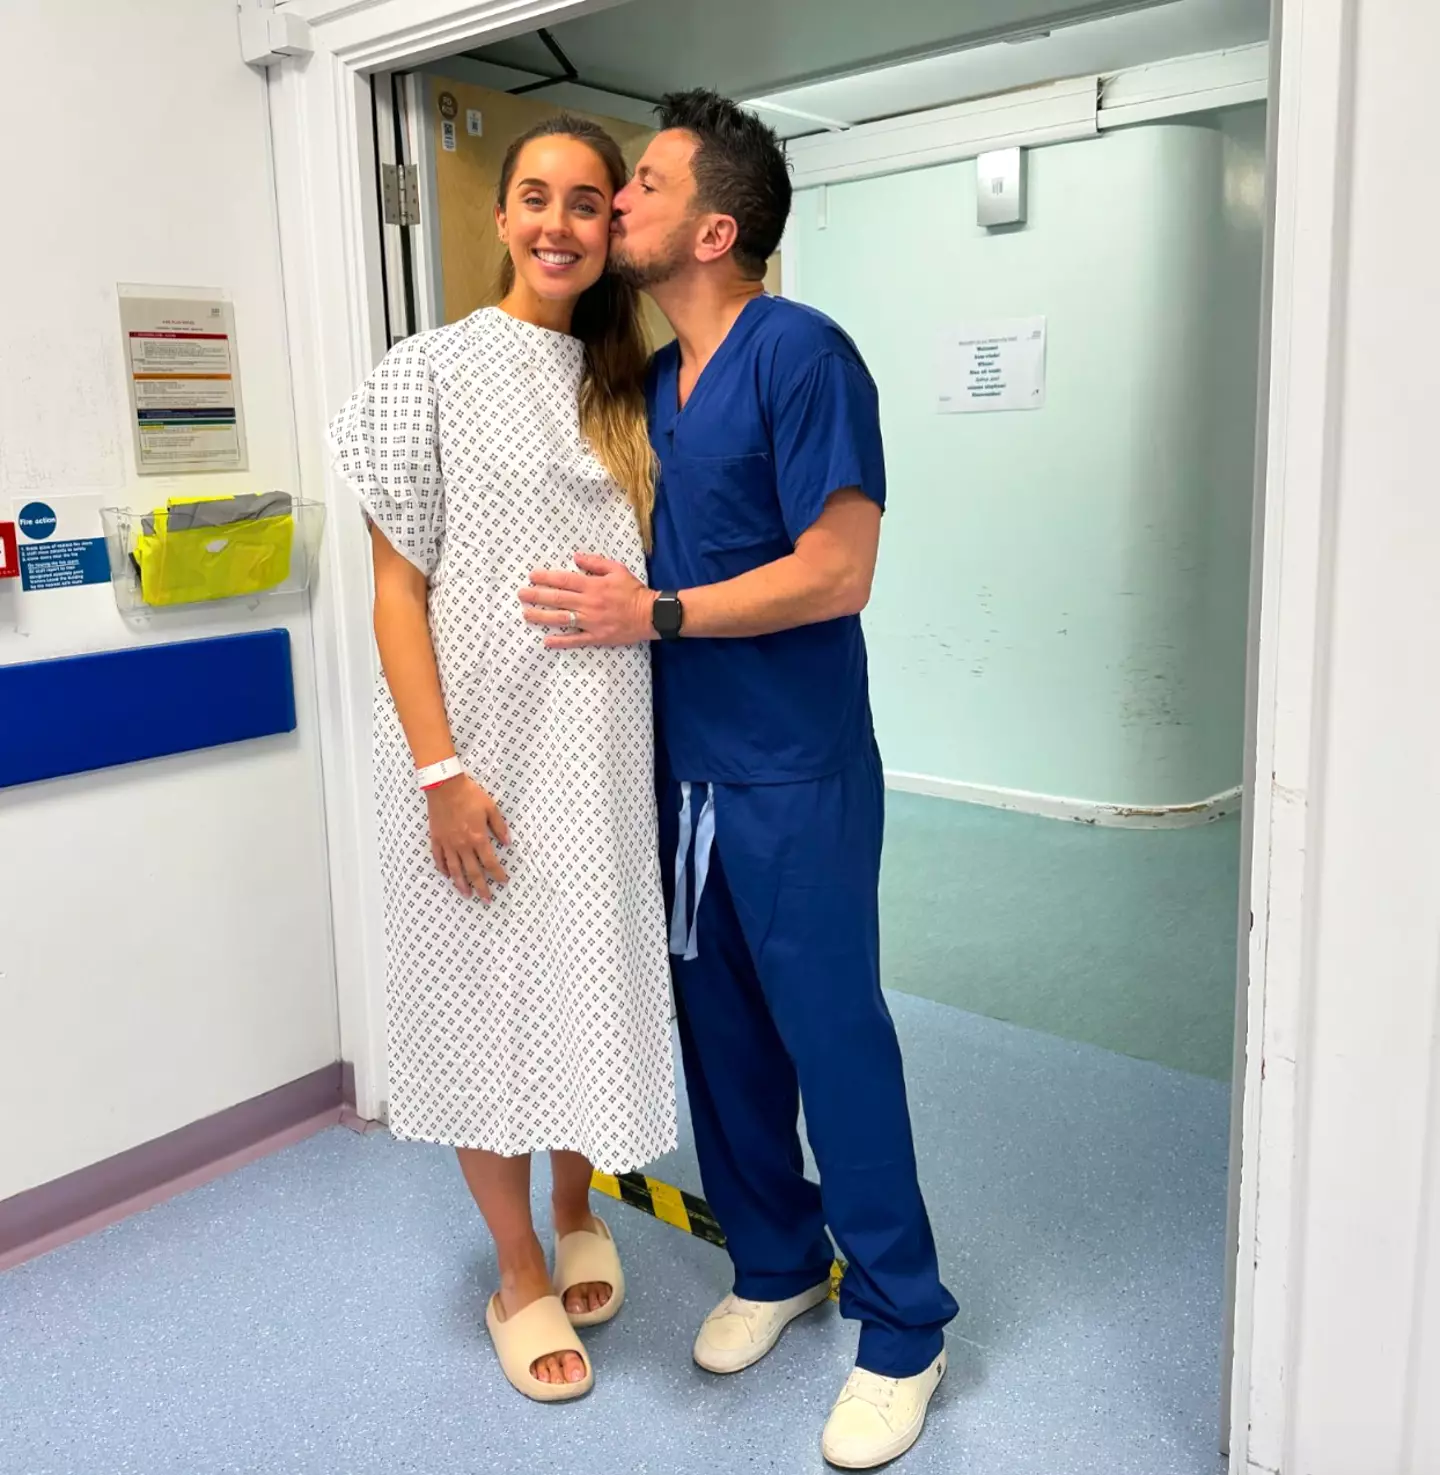 They have just four weeks left to decide a name for their daughter. (Instagram/@peterandre)